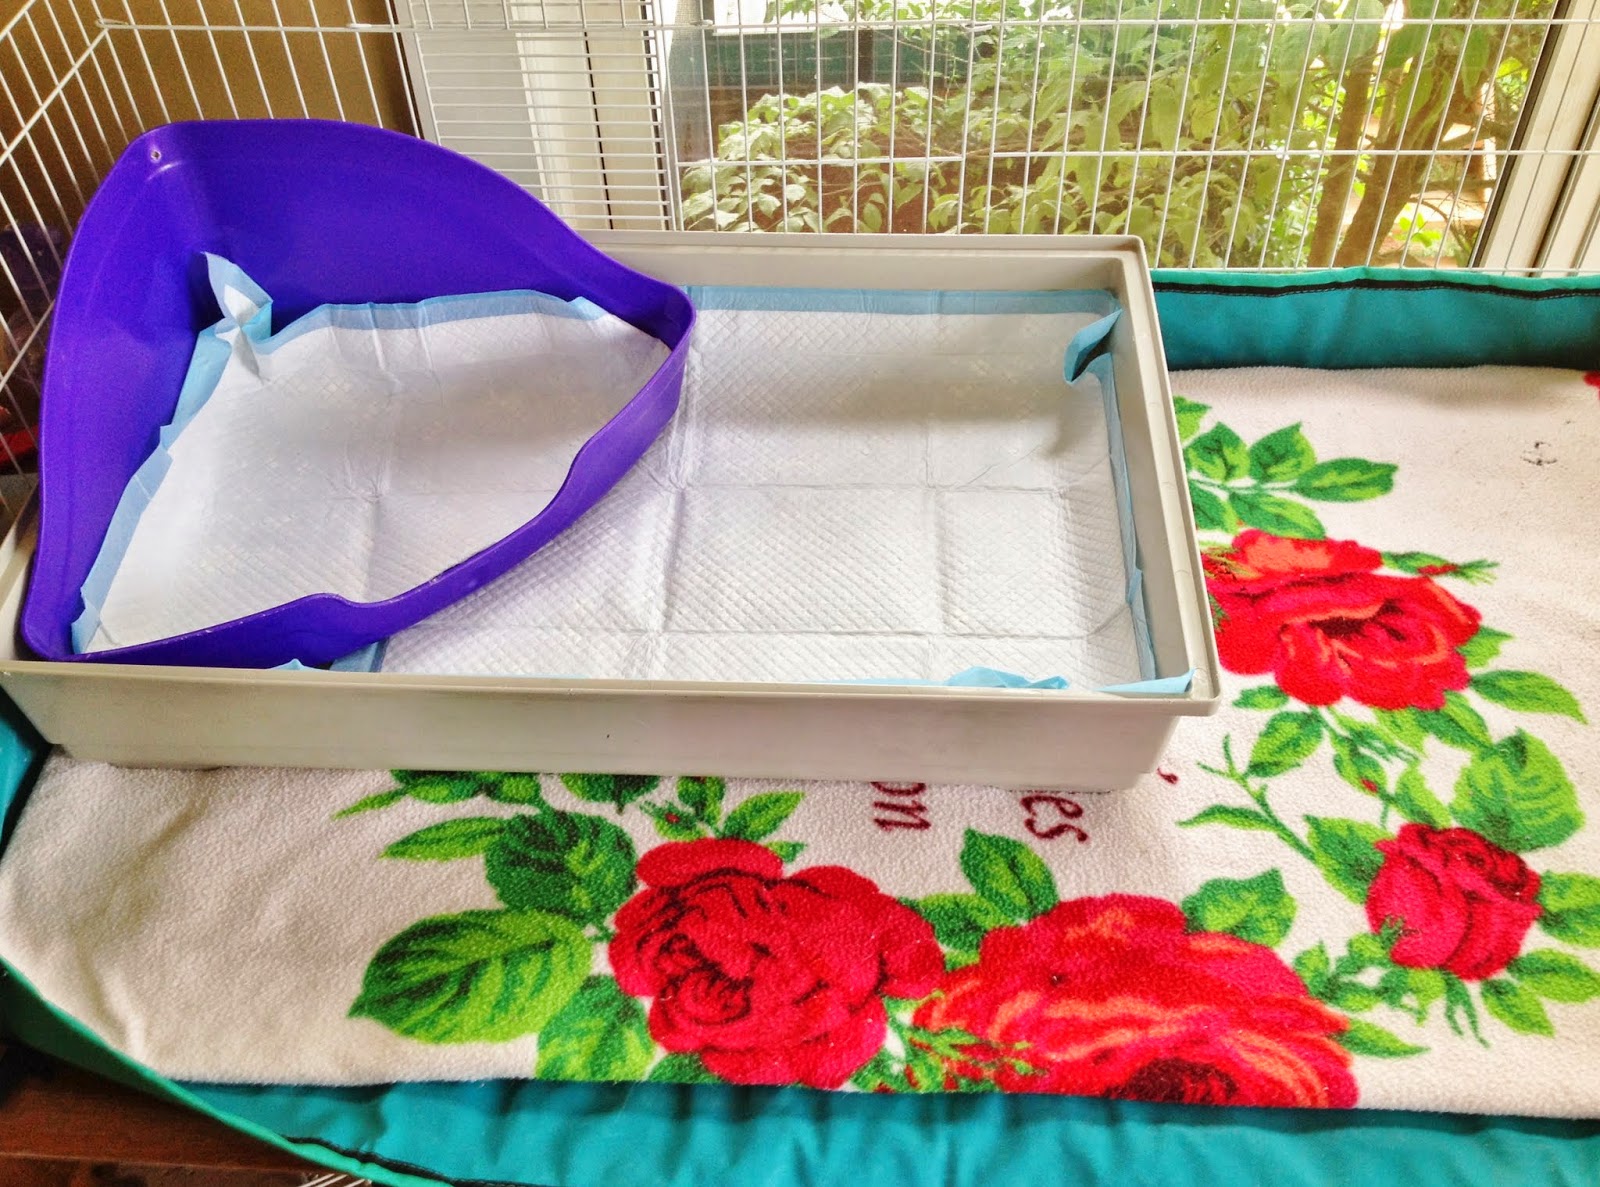 Line the litter pans with puppy wee pads.